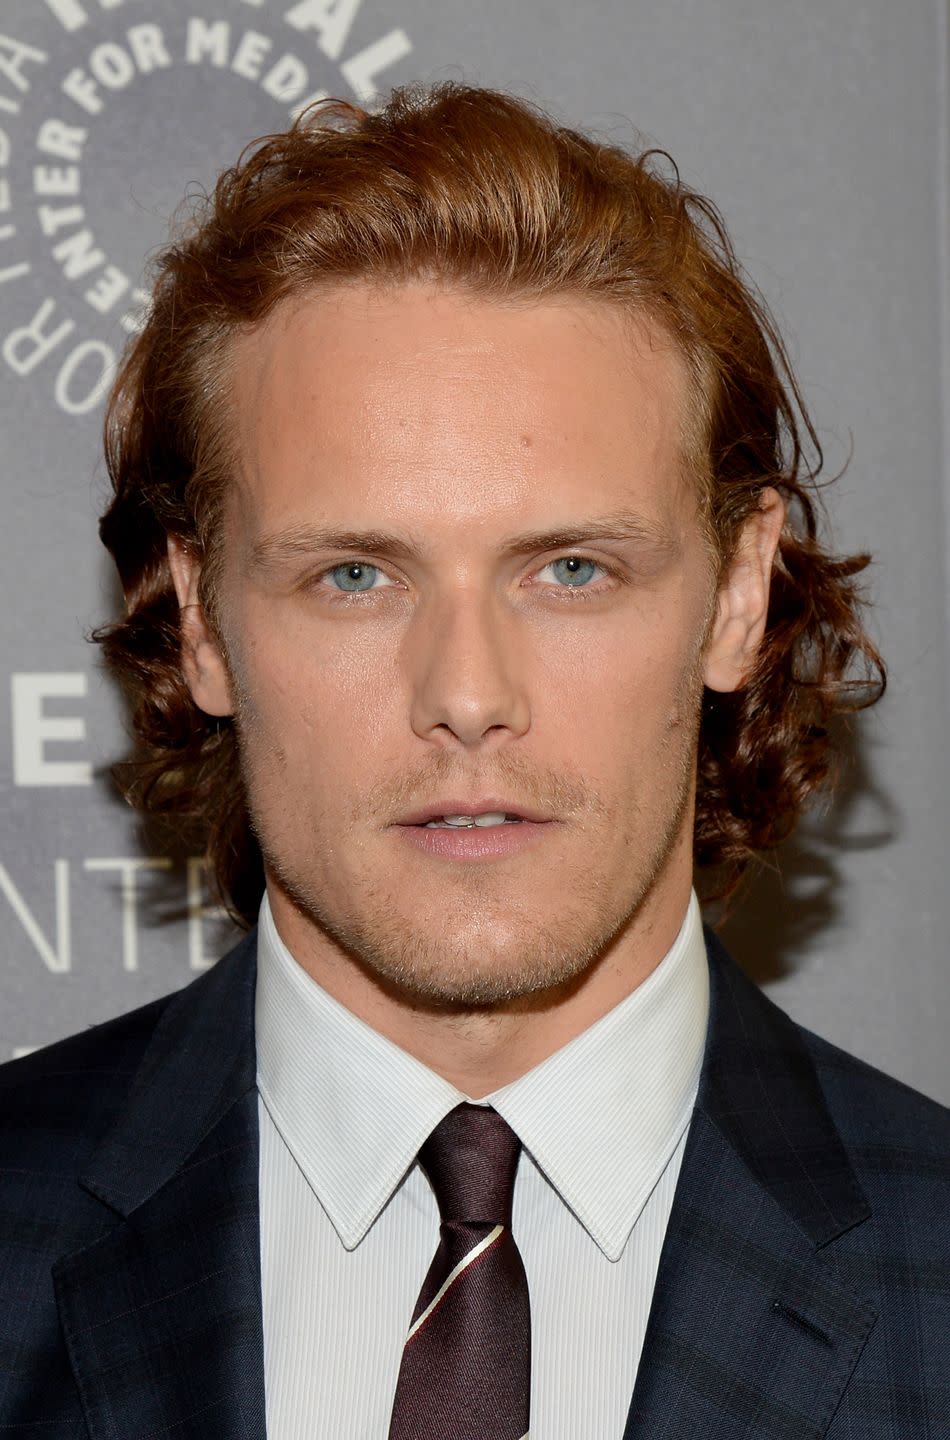 Heughan eventually landed the role after a Skype interview.